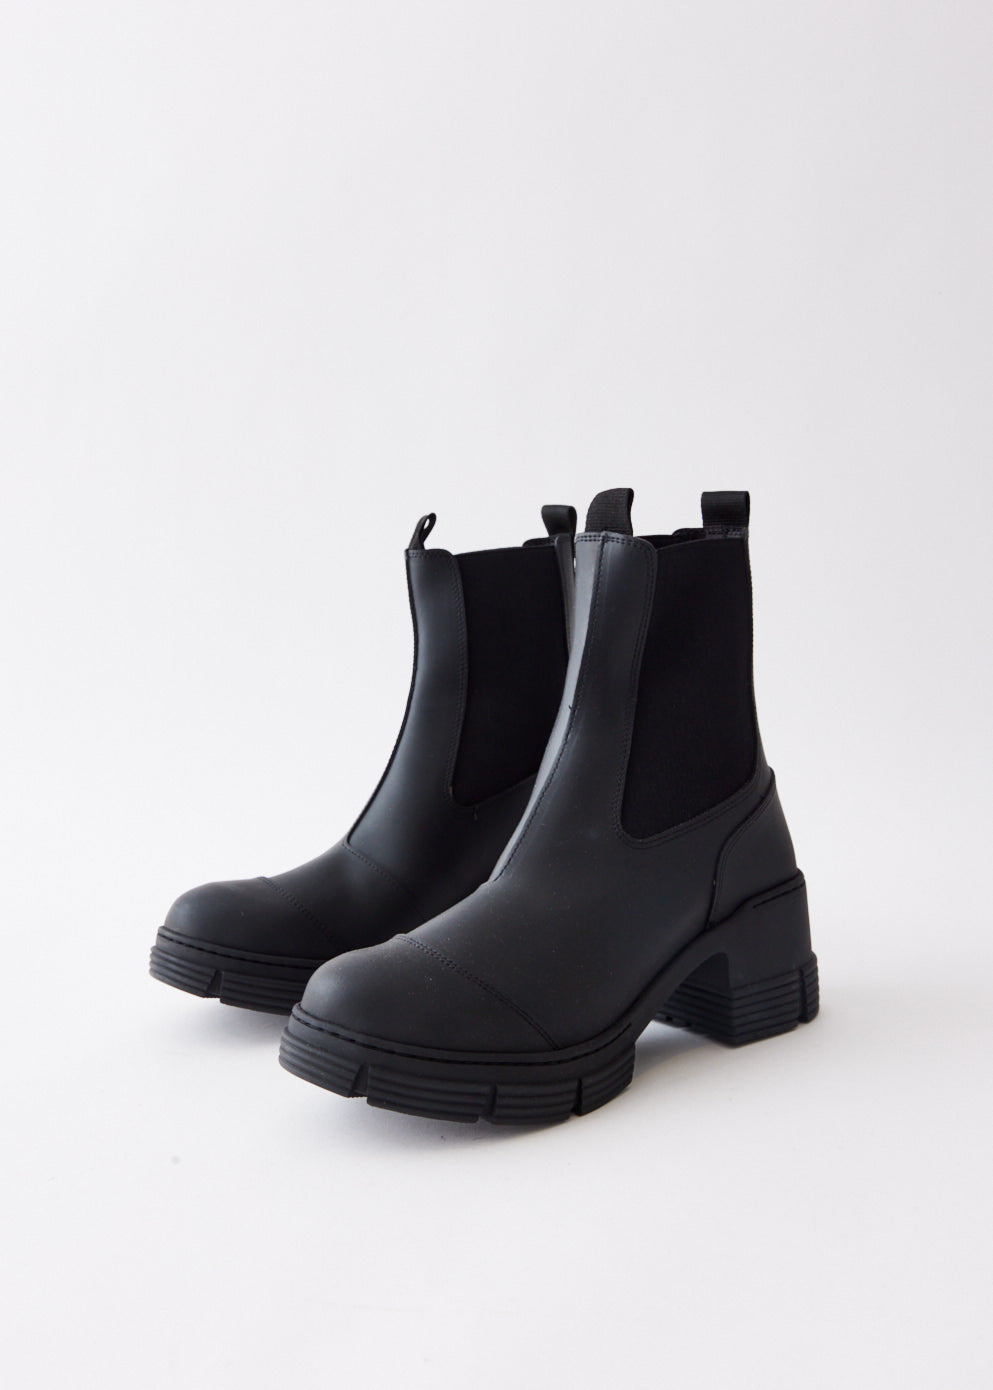 Recycled Rubber Heeled City Boots